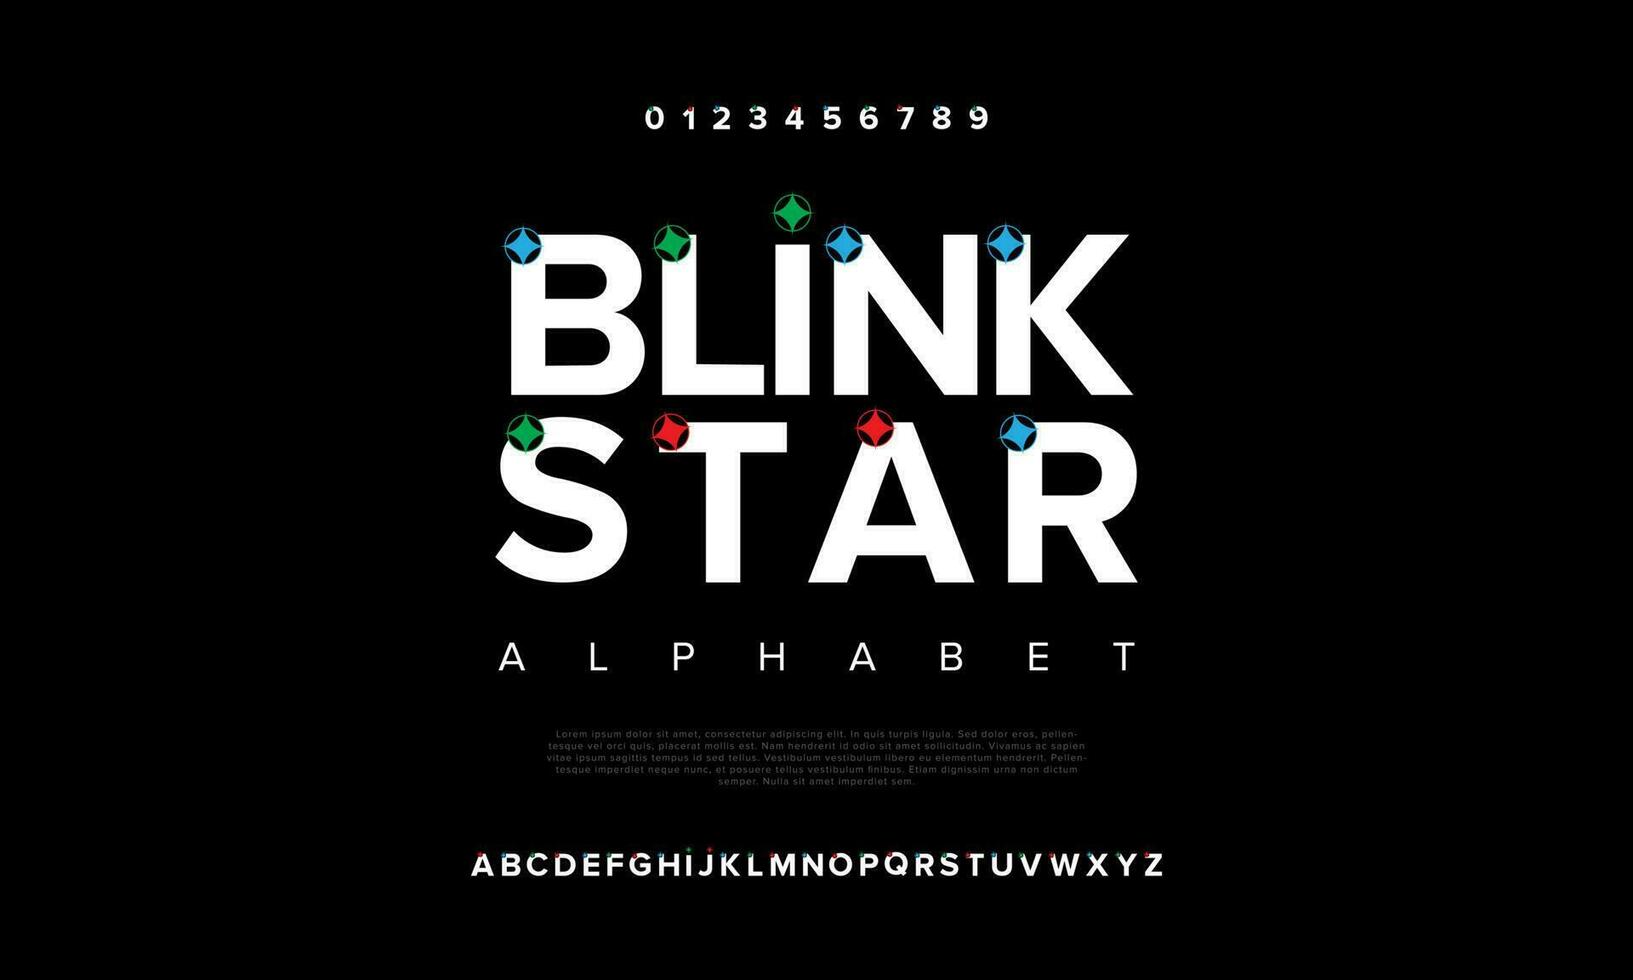 Blink star cute abstract digital technology logo font alphabet. Minimal modern urban fonts for logo, brand etc. Typography typeface uppercase lowercase and number. vector illustration